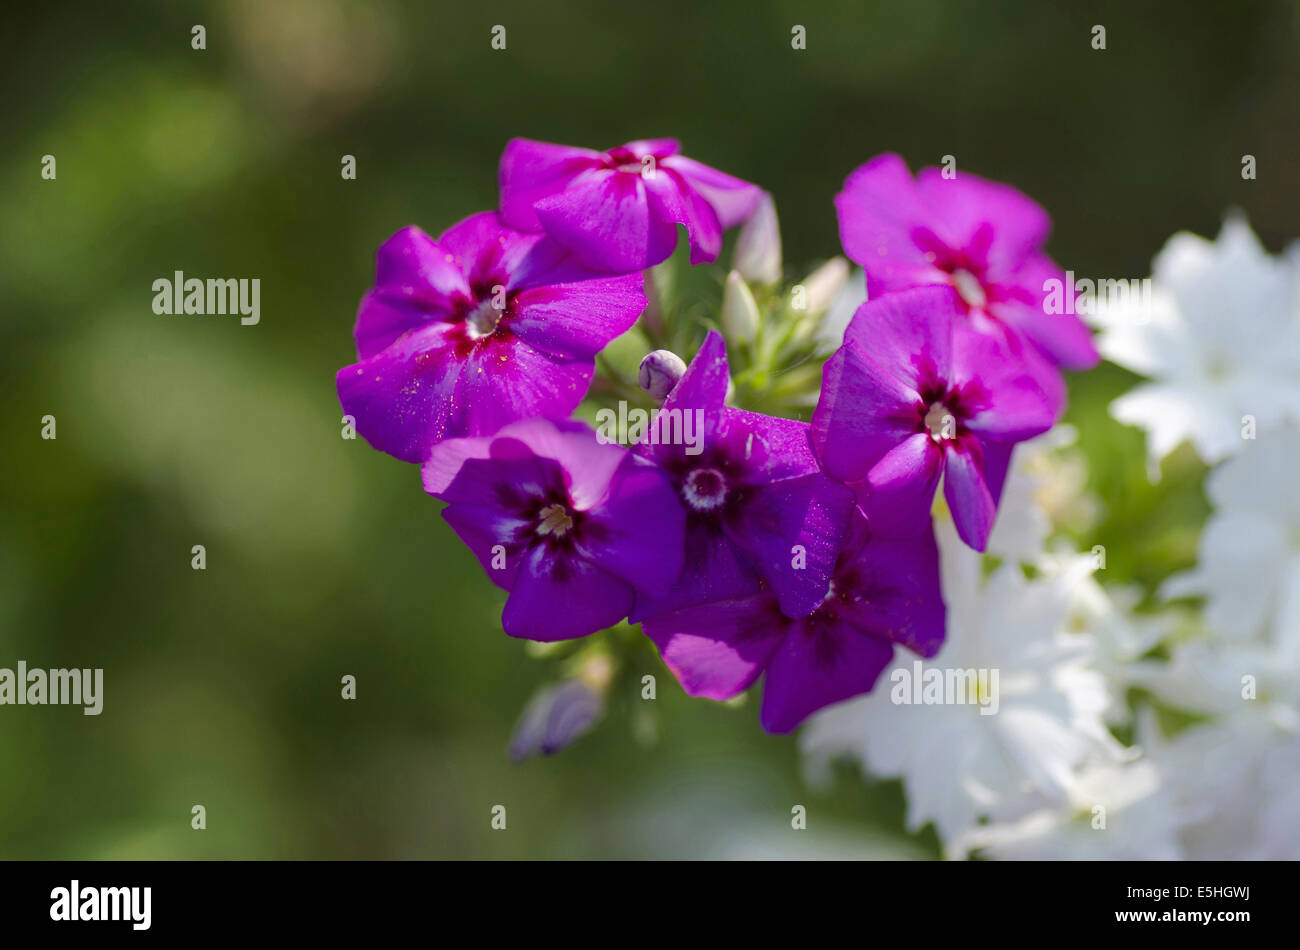 A bunch of small violet flowers, Harish-Chandra Research Institute Campus, Allahabad, Uttar Pradesh, India Stock Photo